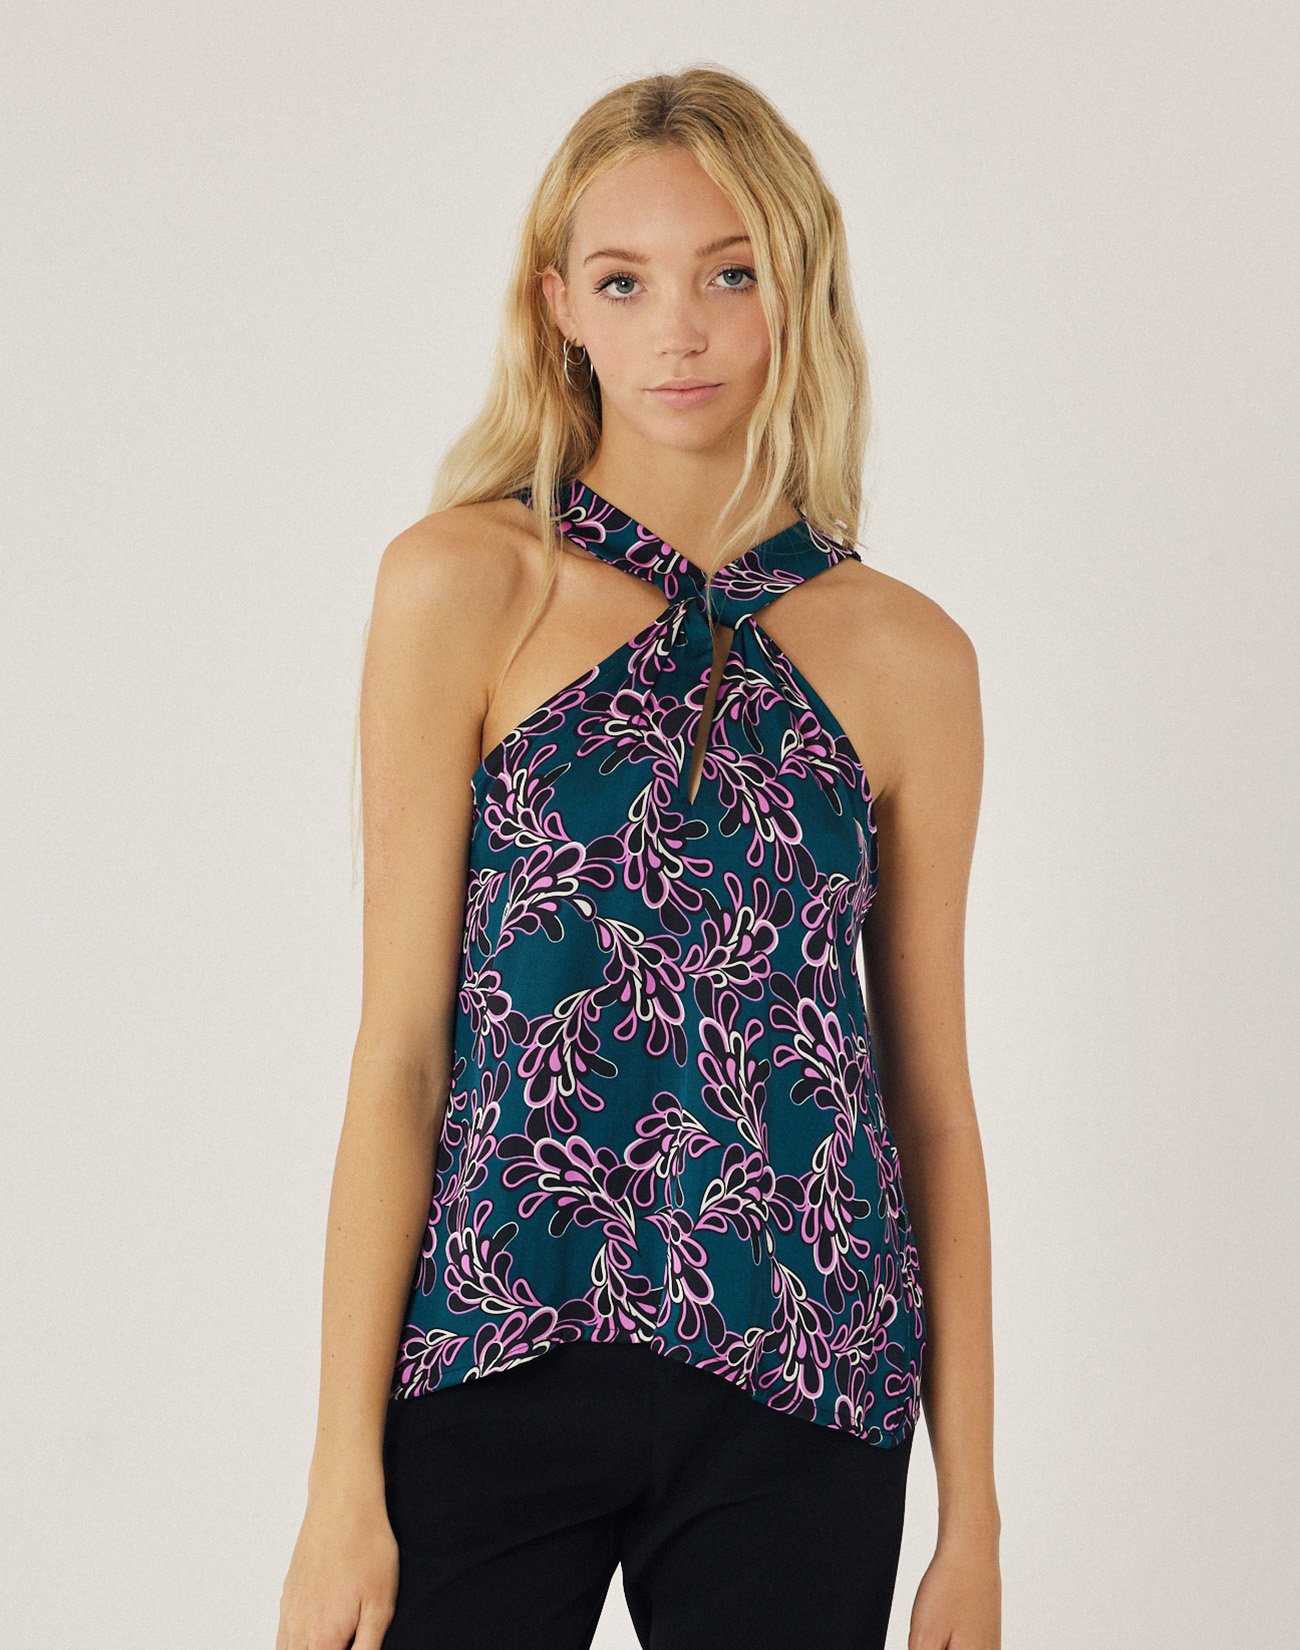 Printed top with opening